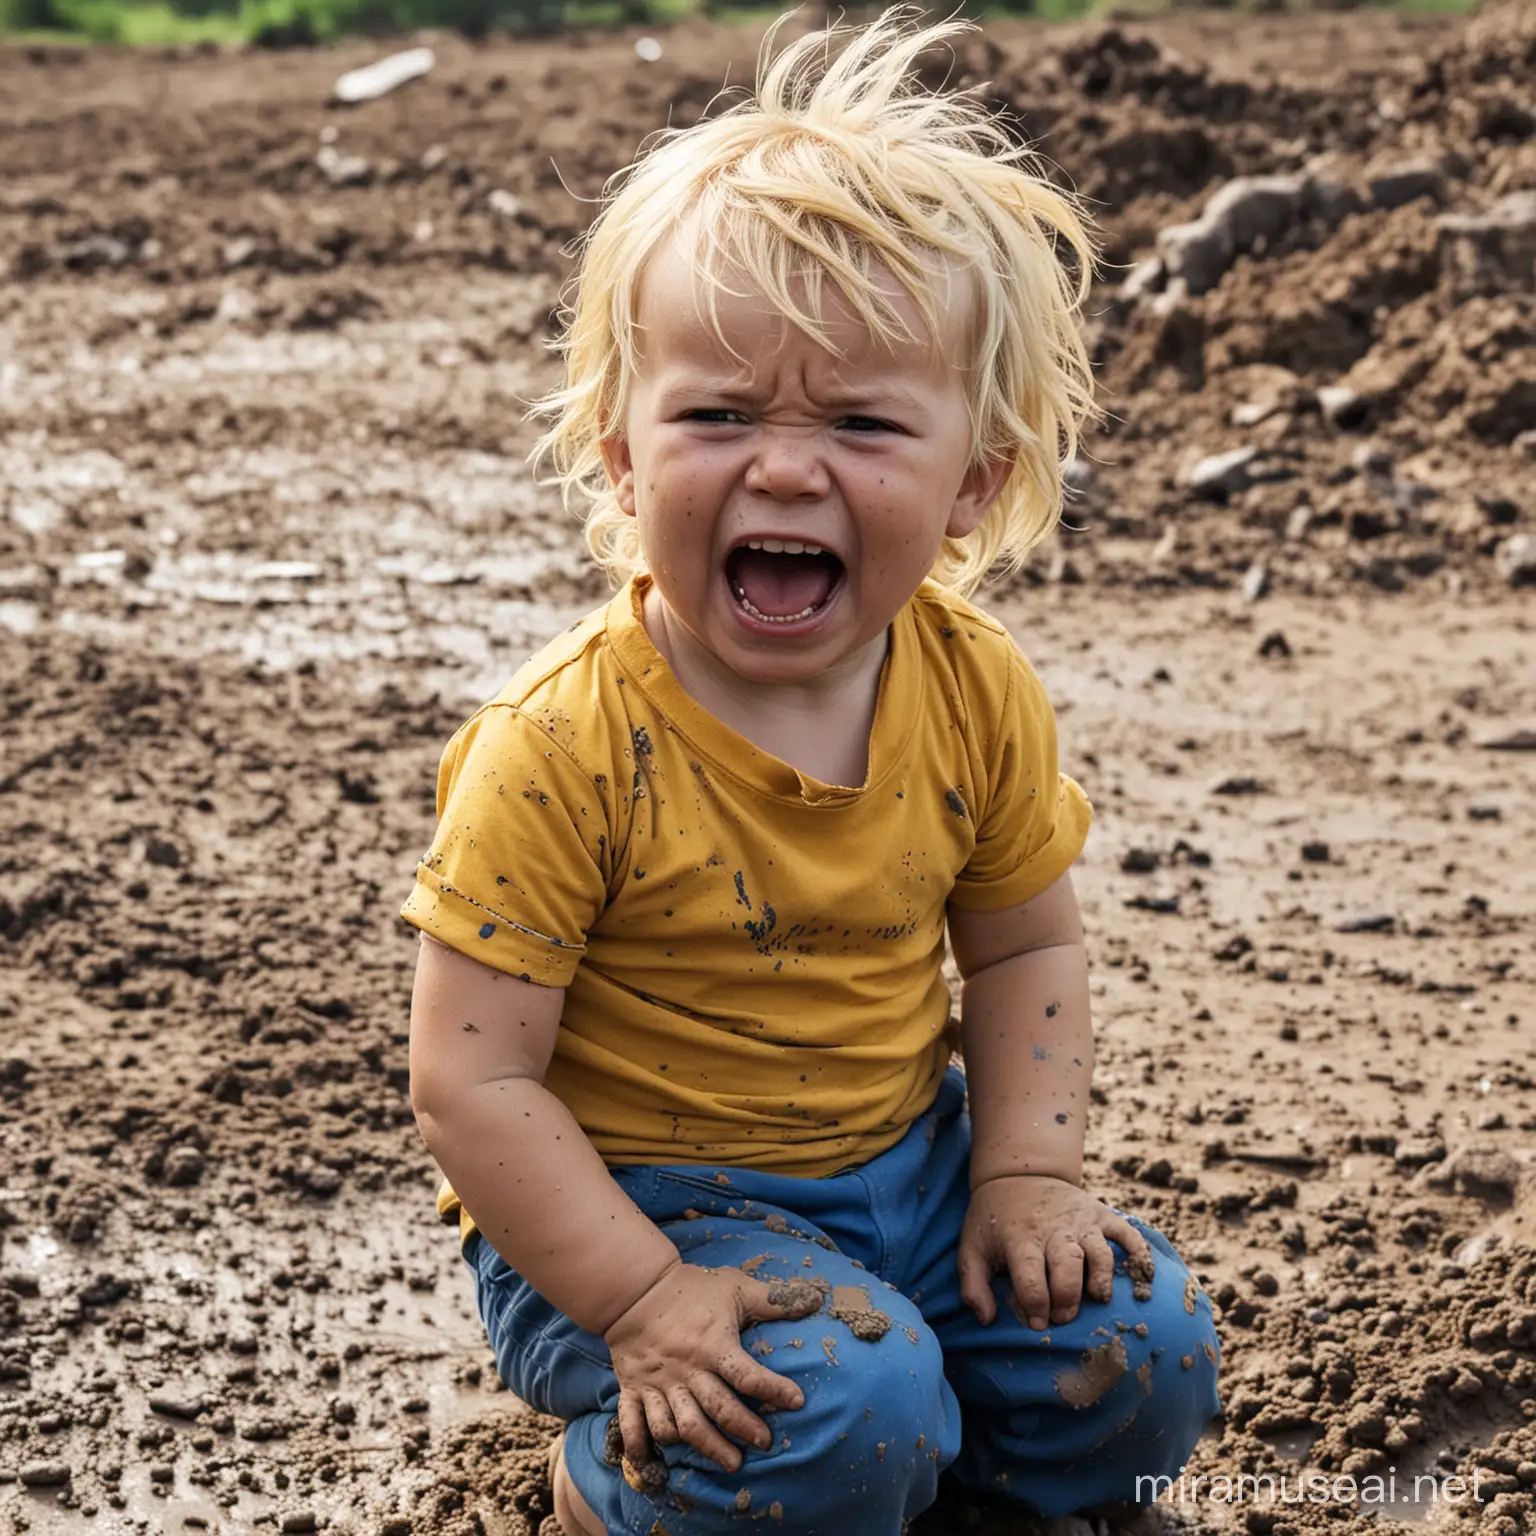 Distressed Toddler Crying in WarTorn Environment